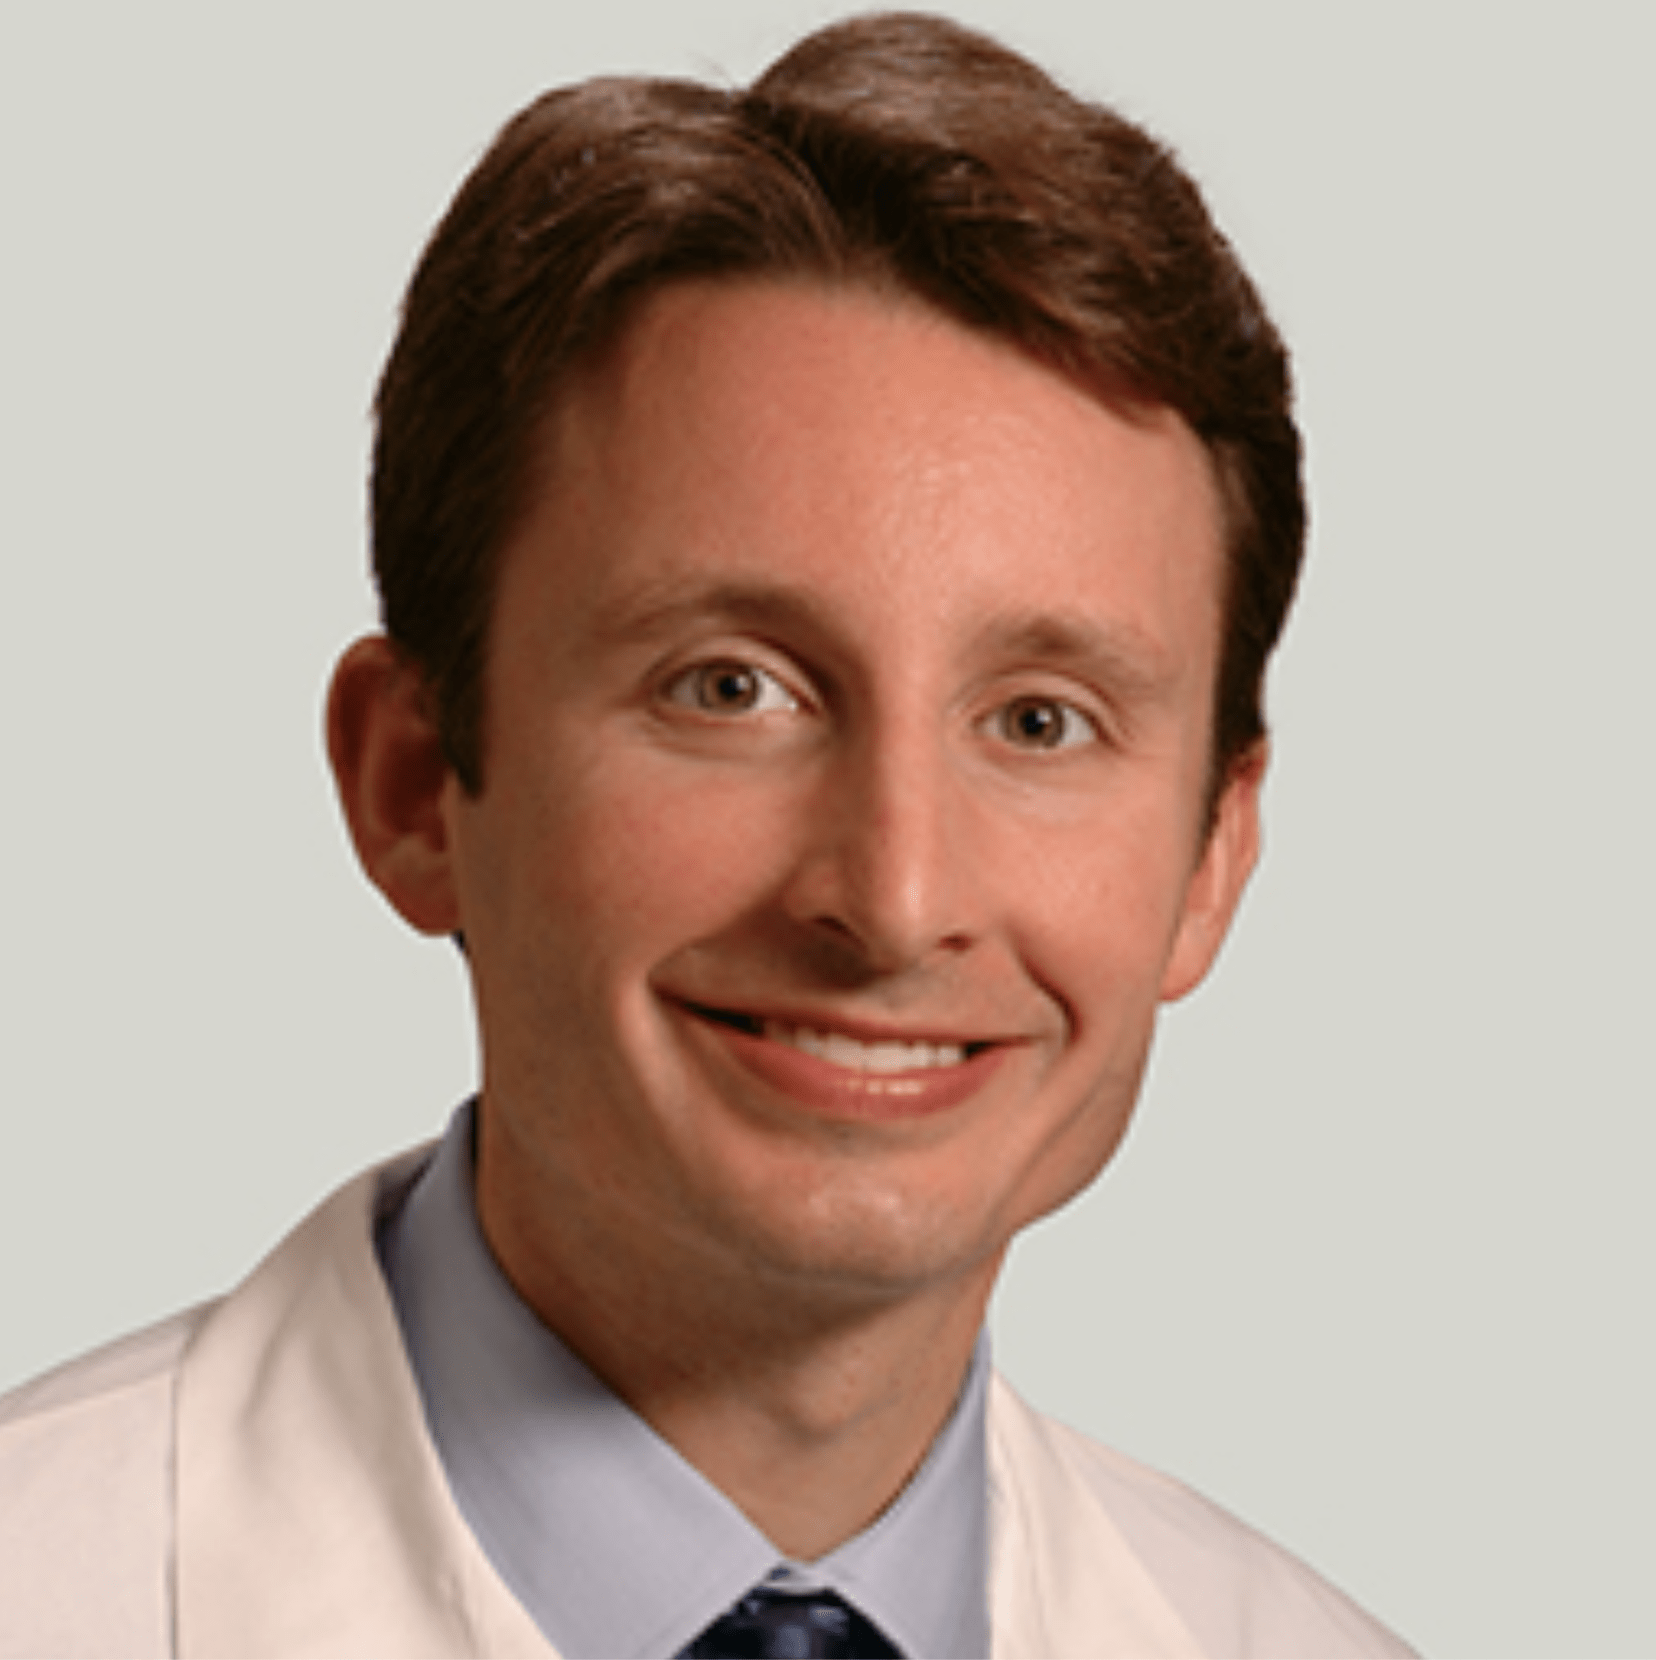 Peter H. O'Donnell, MD